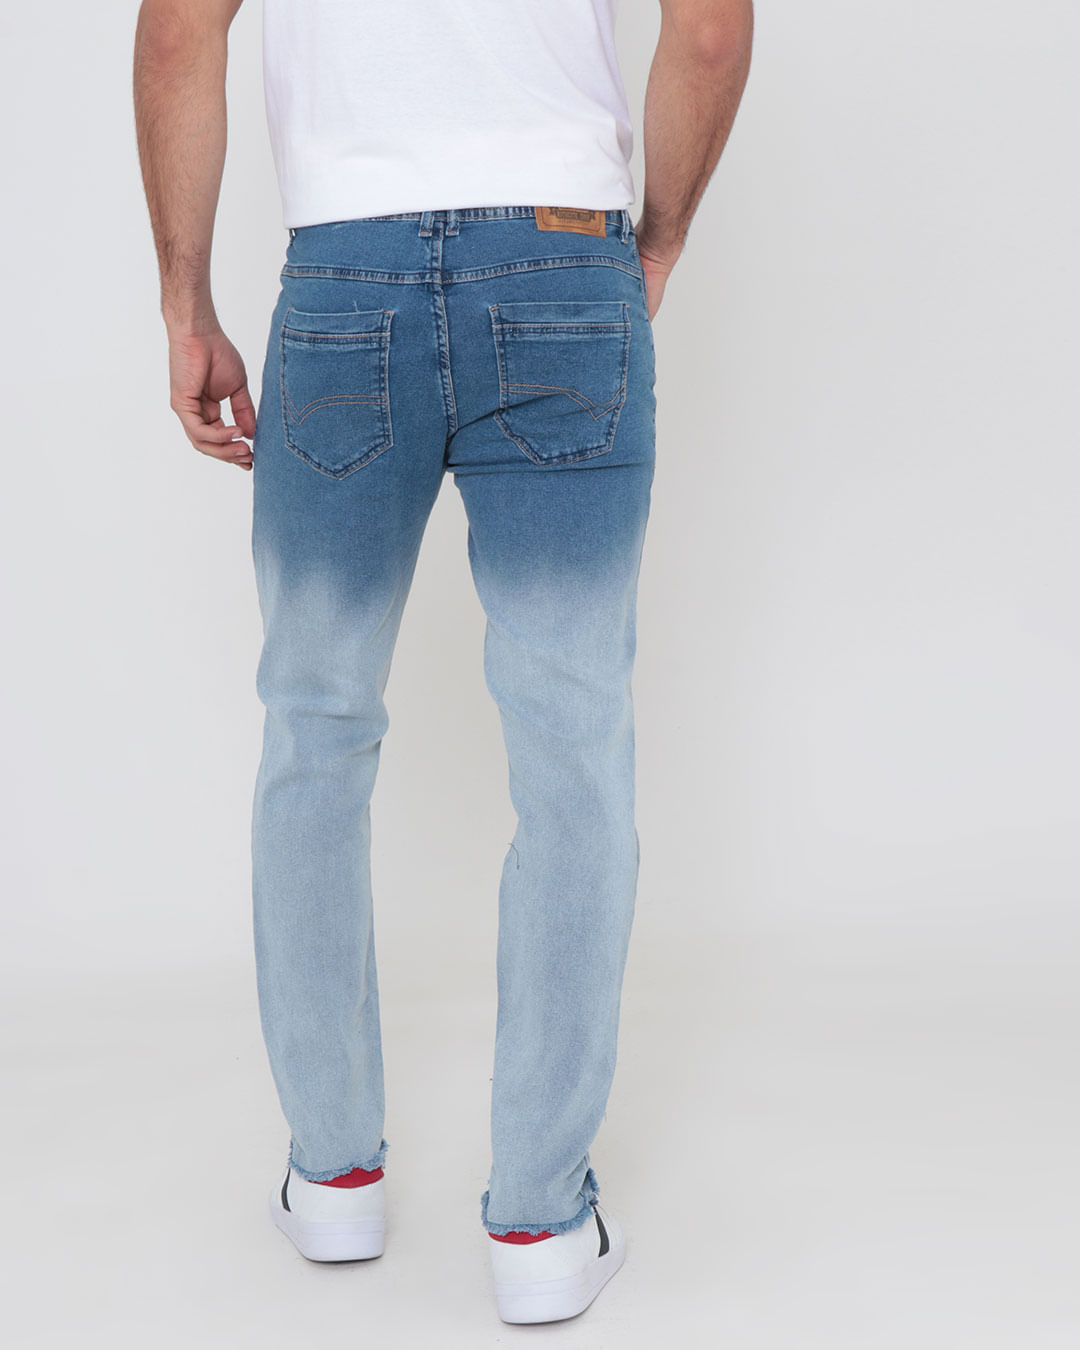 Calca-Jeans-Masculina-Destroyed-Skinny-Azul